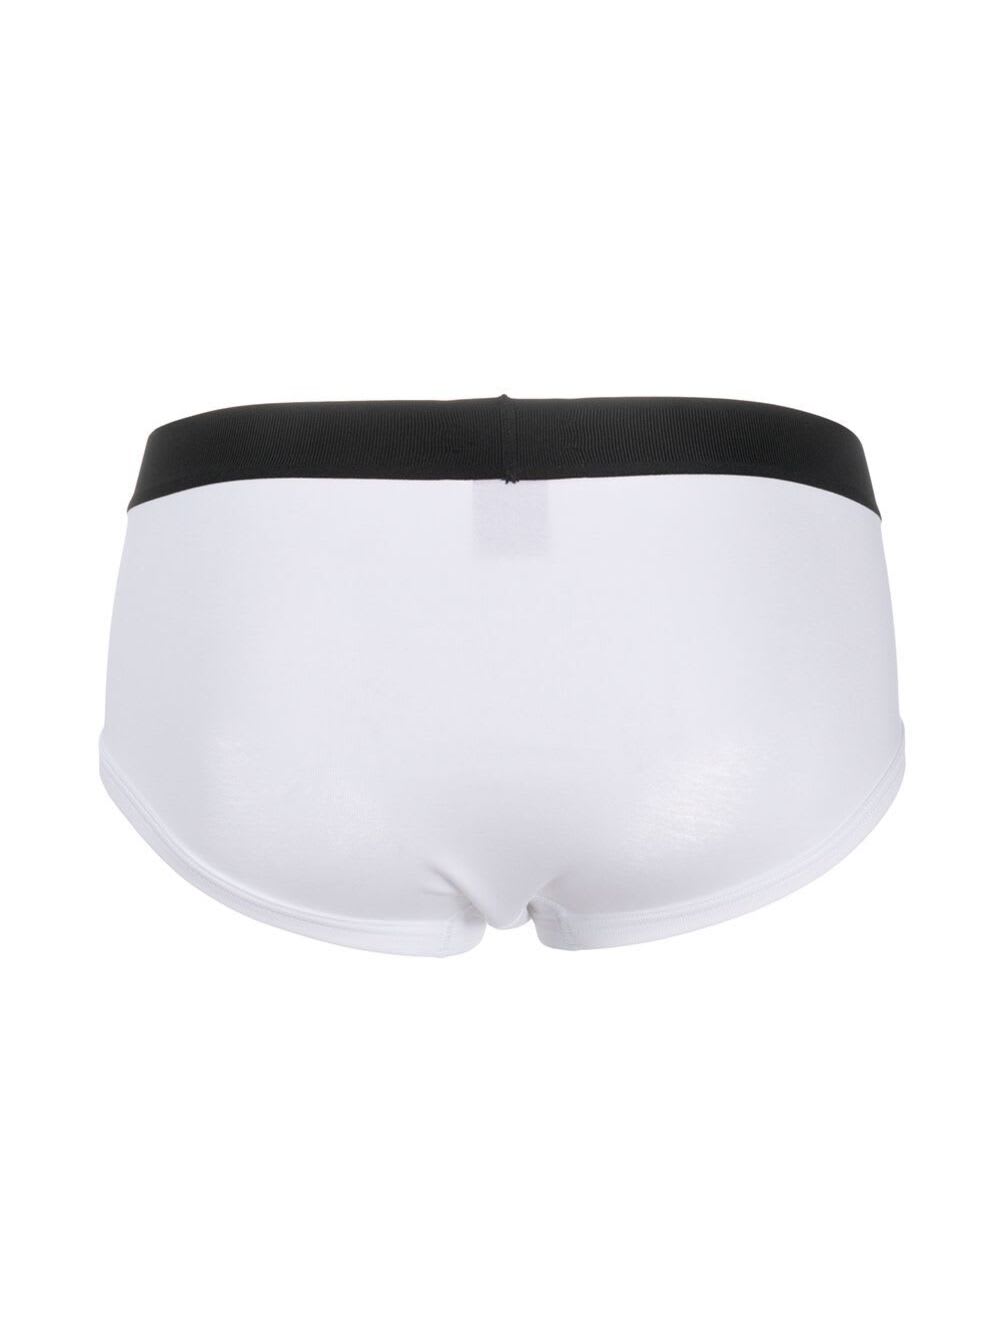 Shop Tom Ford Womans Two White Cotton Briefs With Logo